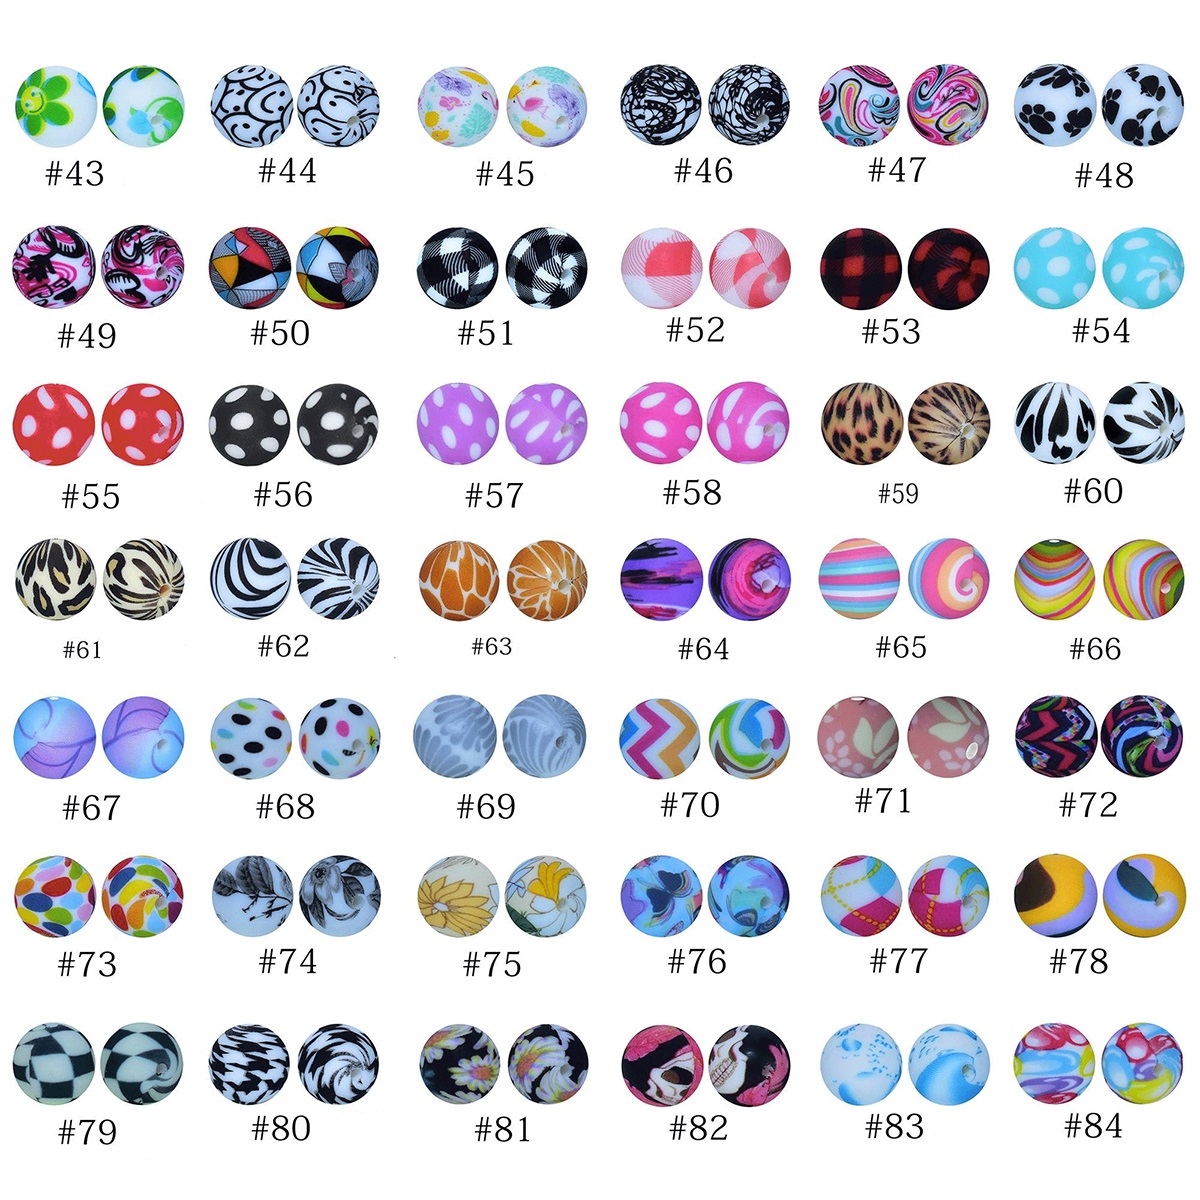 15mm Silicone Beads Wholesale - Chieeon - Wholesale Toys For